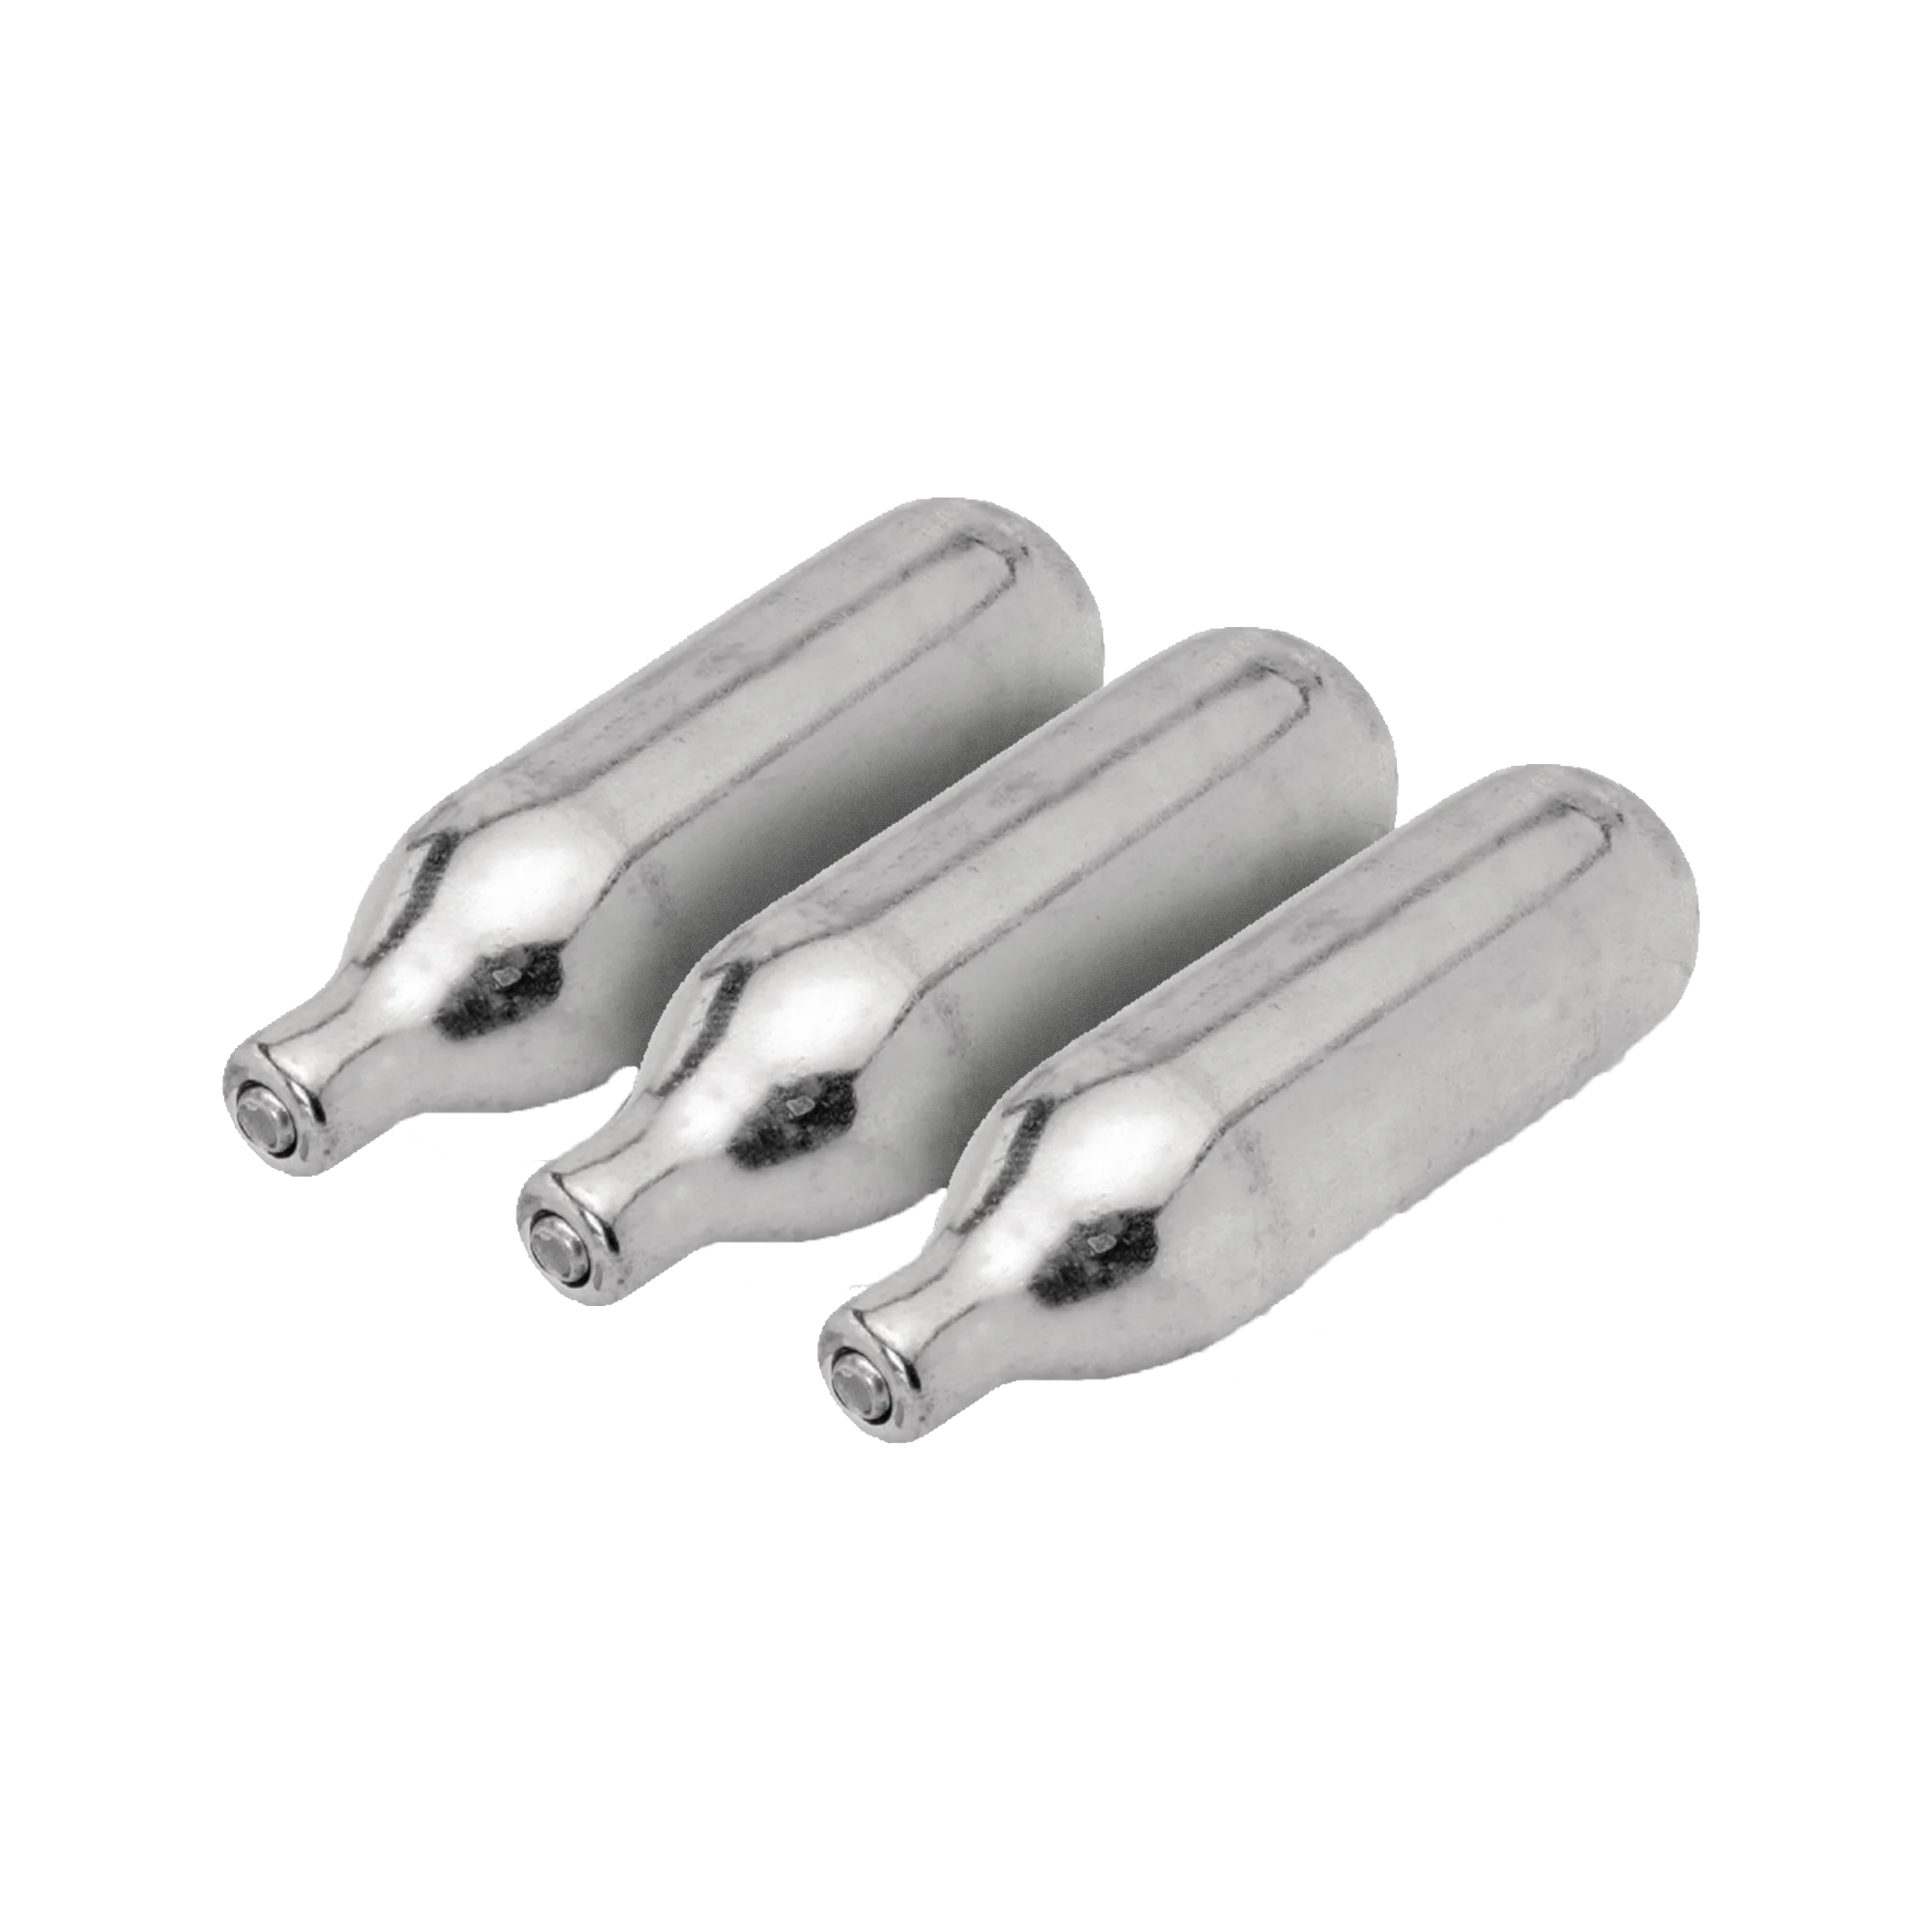 Bulk Stock Eco-Friendly Whipped Cream Chargers - Nitrous Oxide